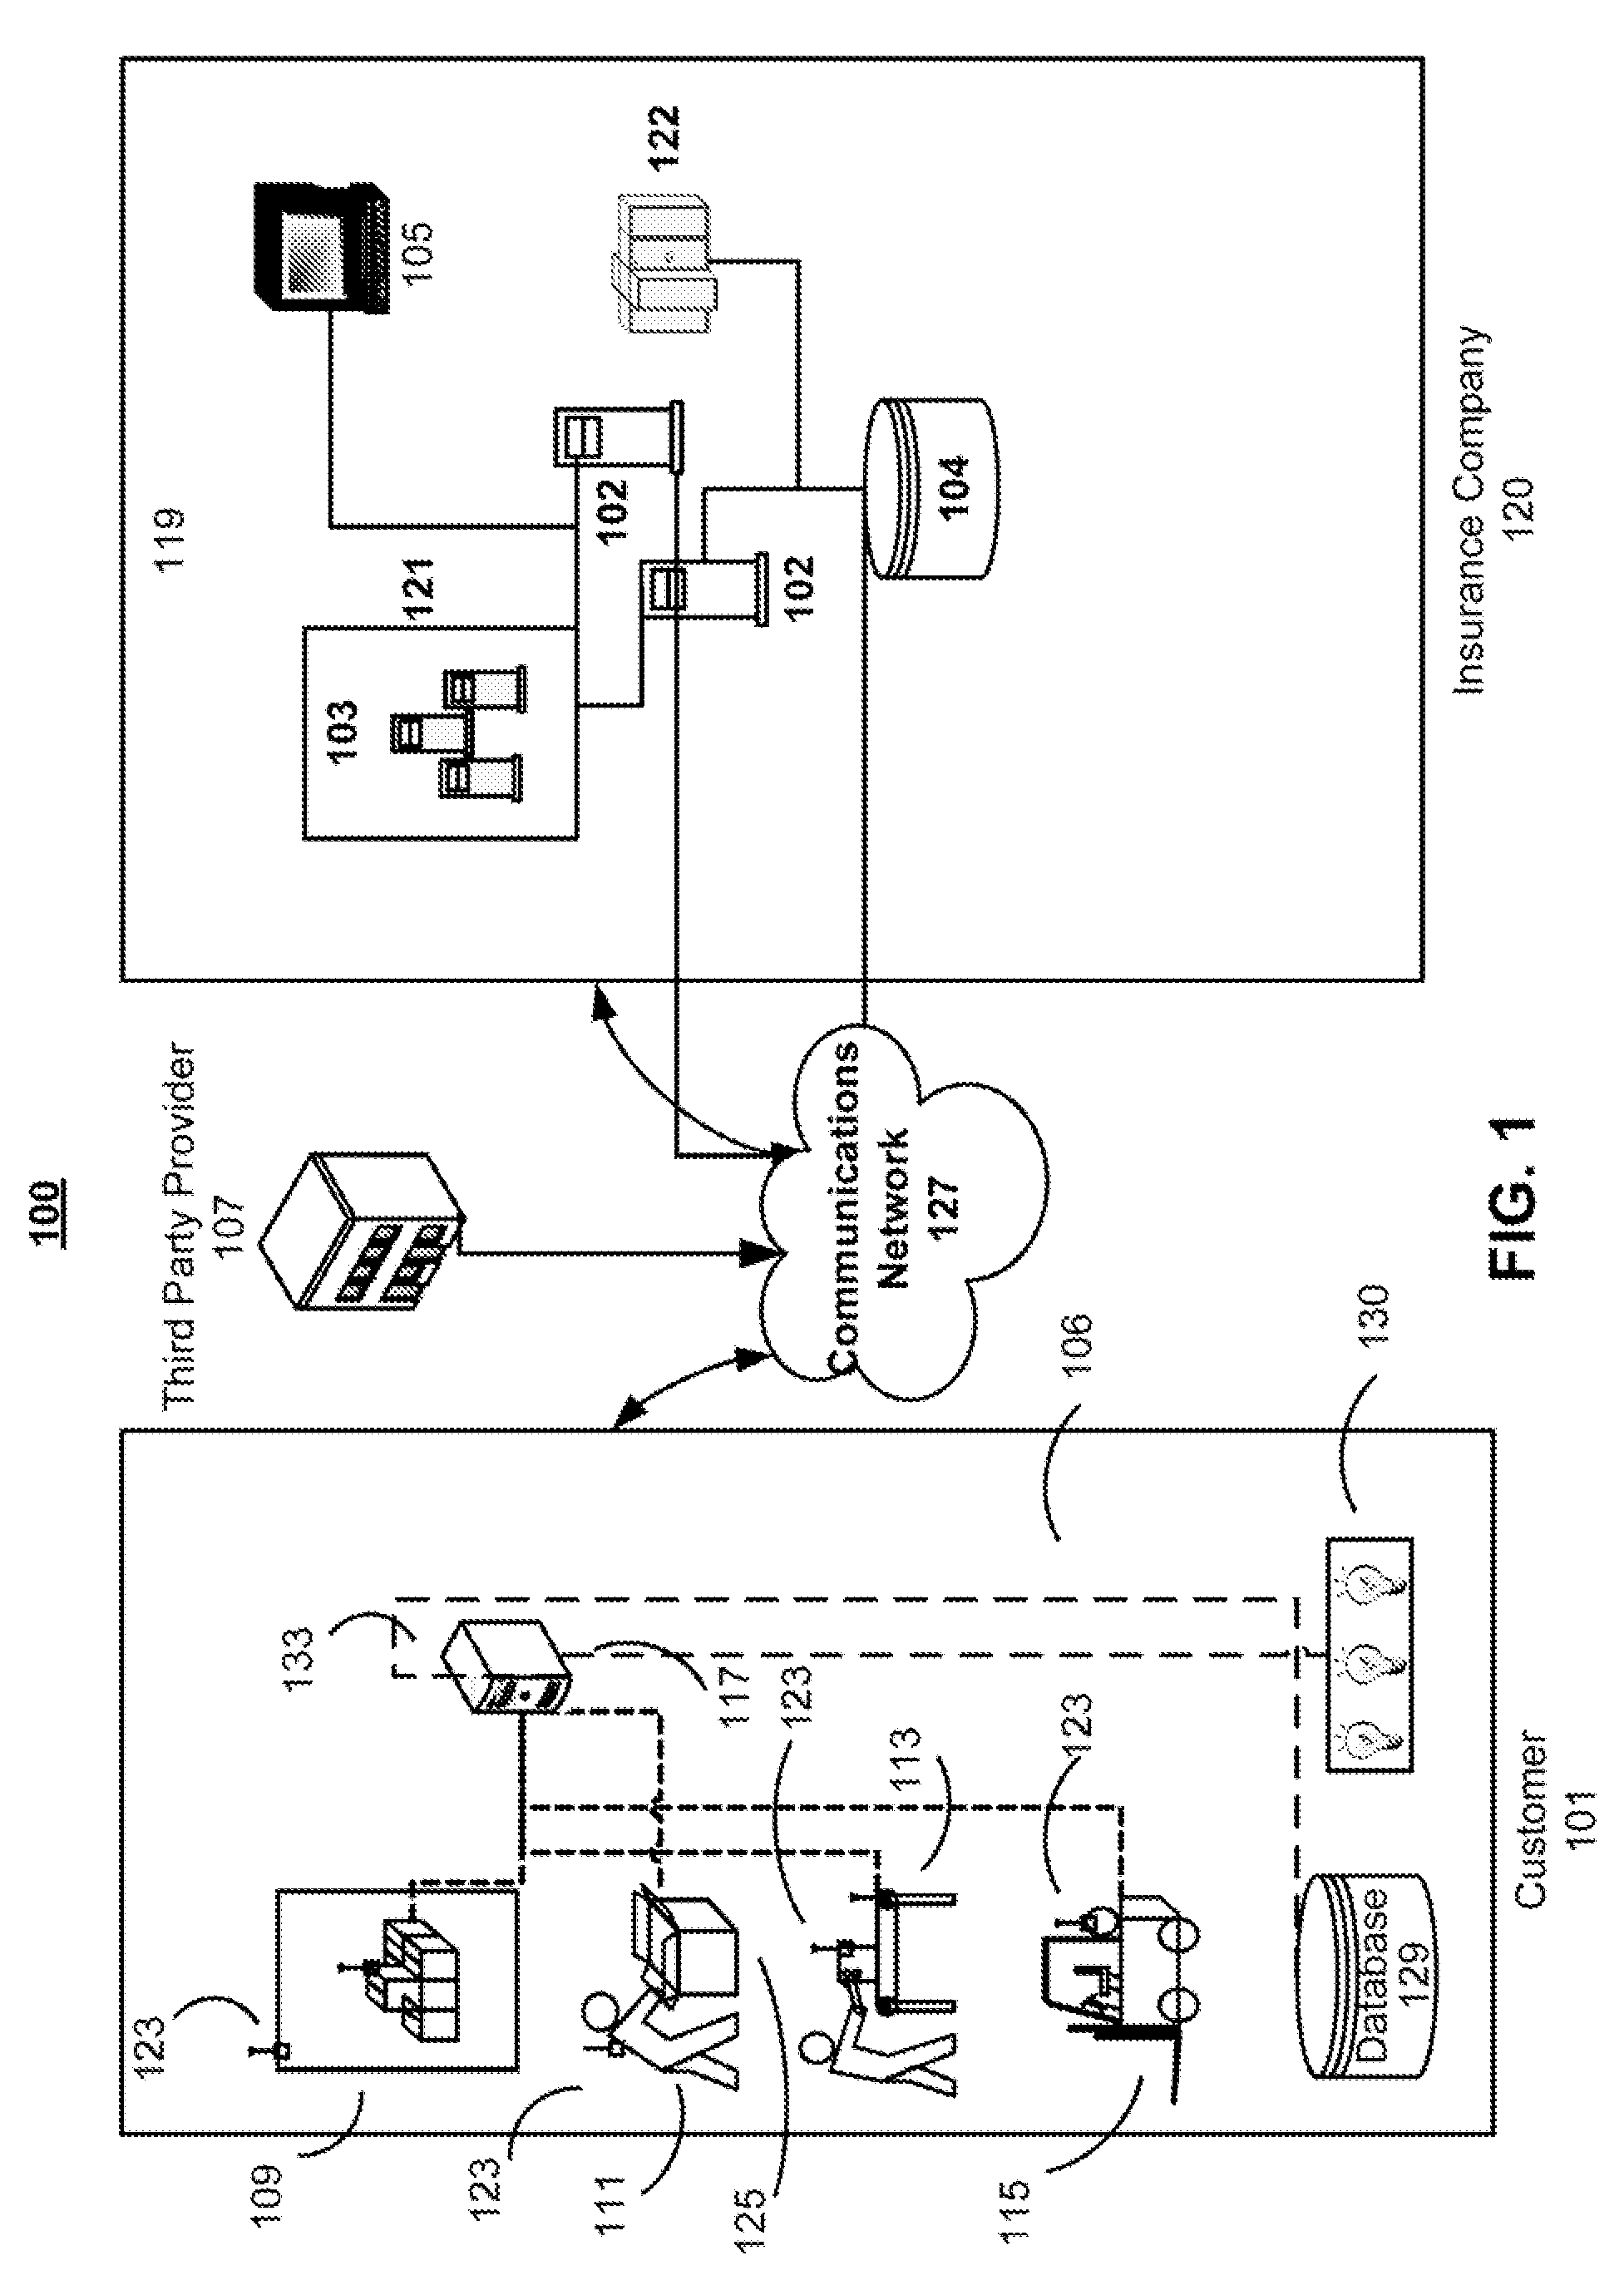 Lift monitoring system and method